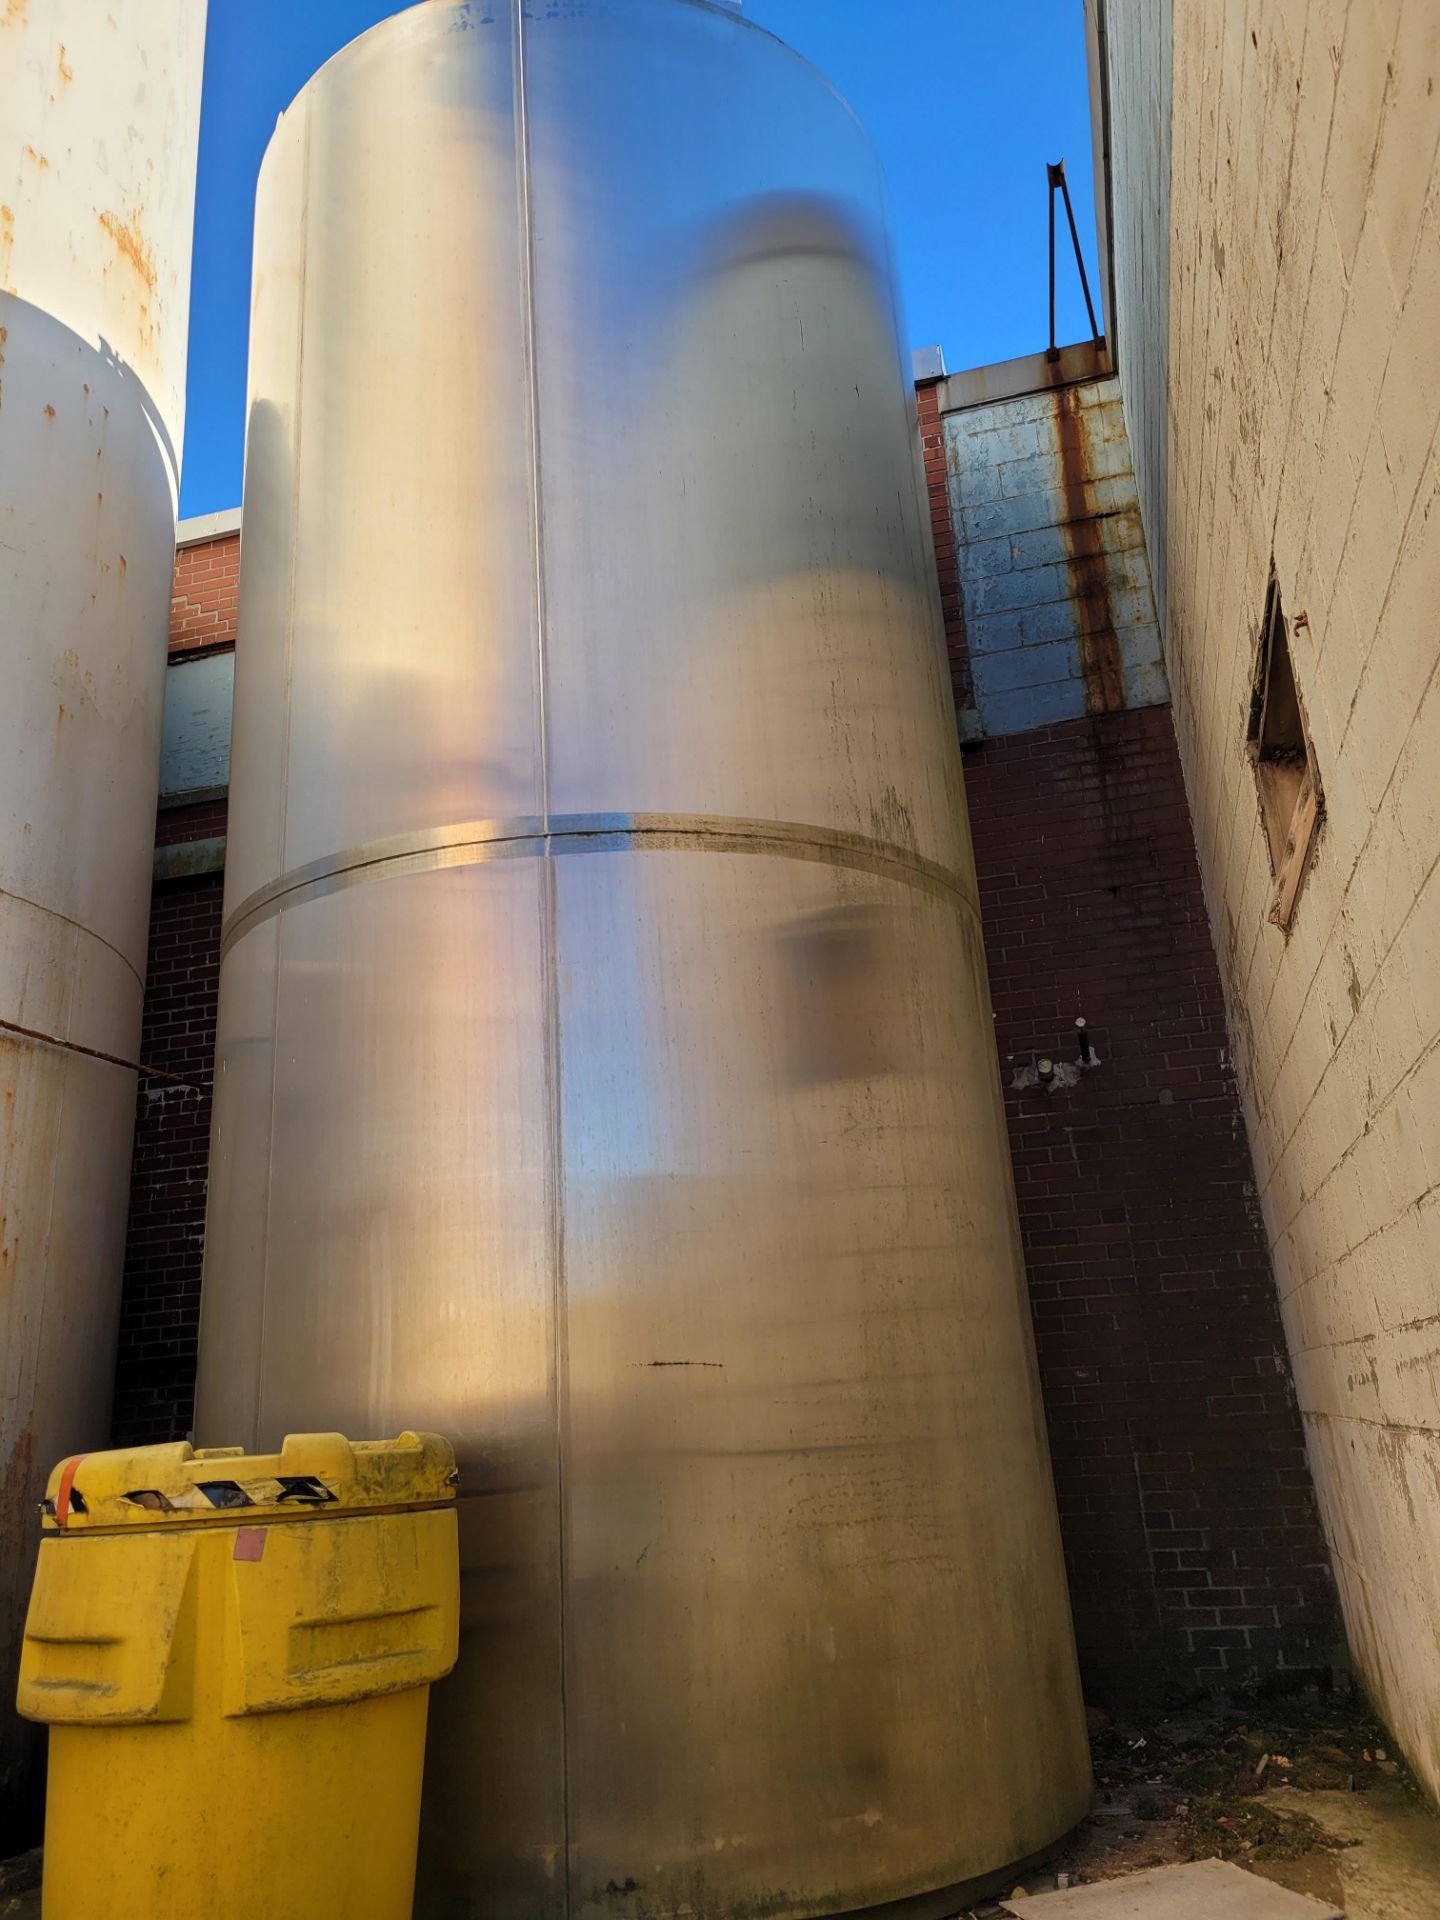 FELDMEIER 6500 gallon all stainless vertical jacketed storage tank, gallons based upon noted capaci - Image 5 of 8